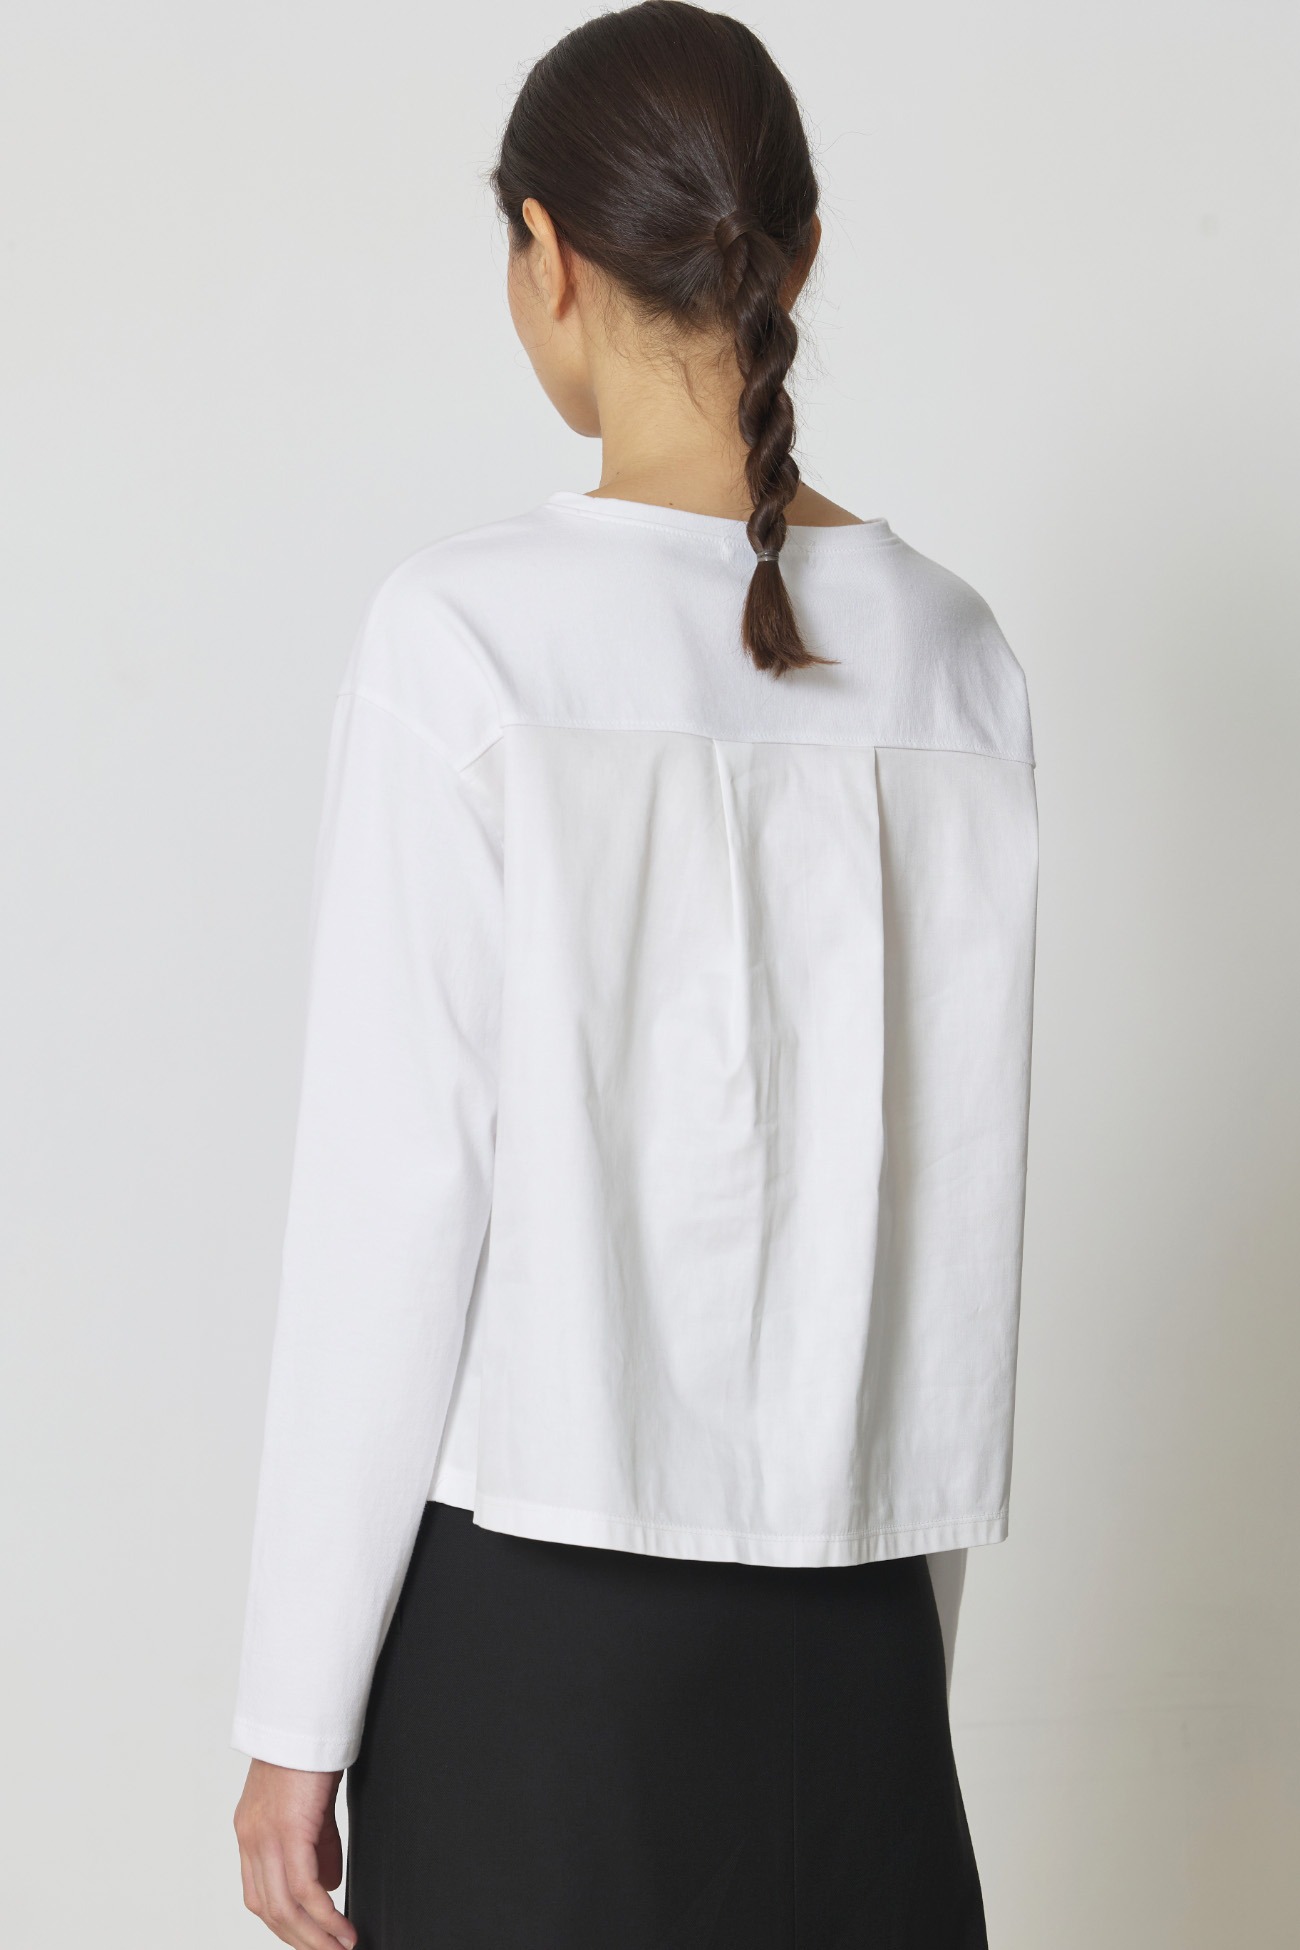 Panel real cotton top white